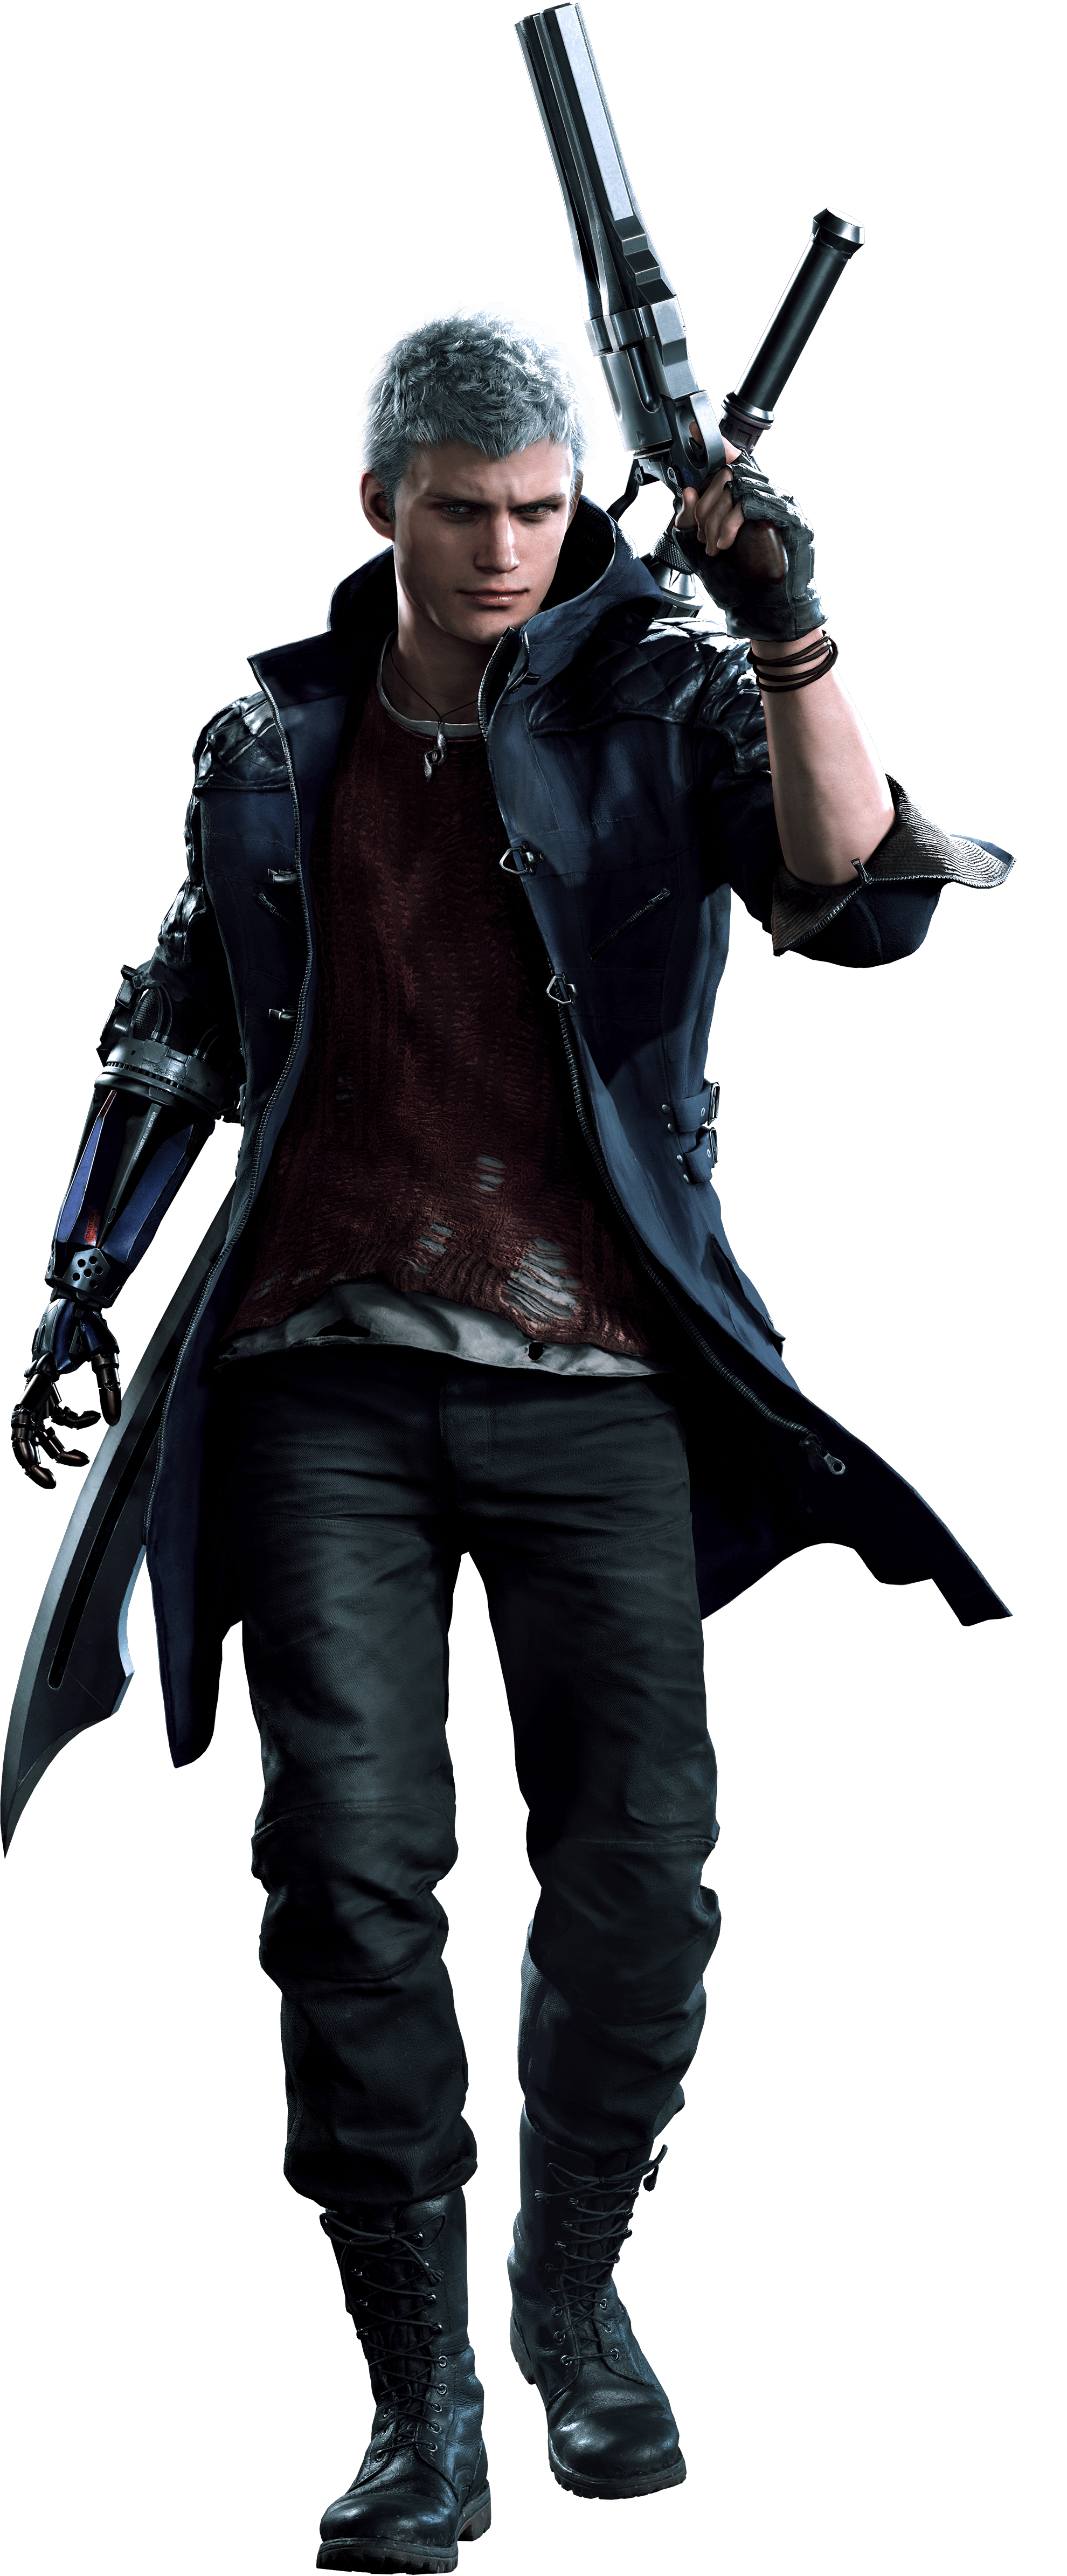 Game Devil May Cry 4 Nero Coat - Jackets Masters